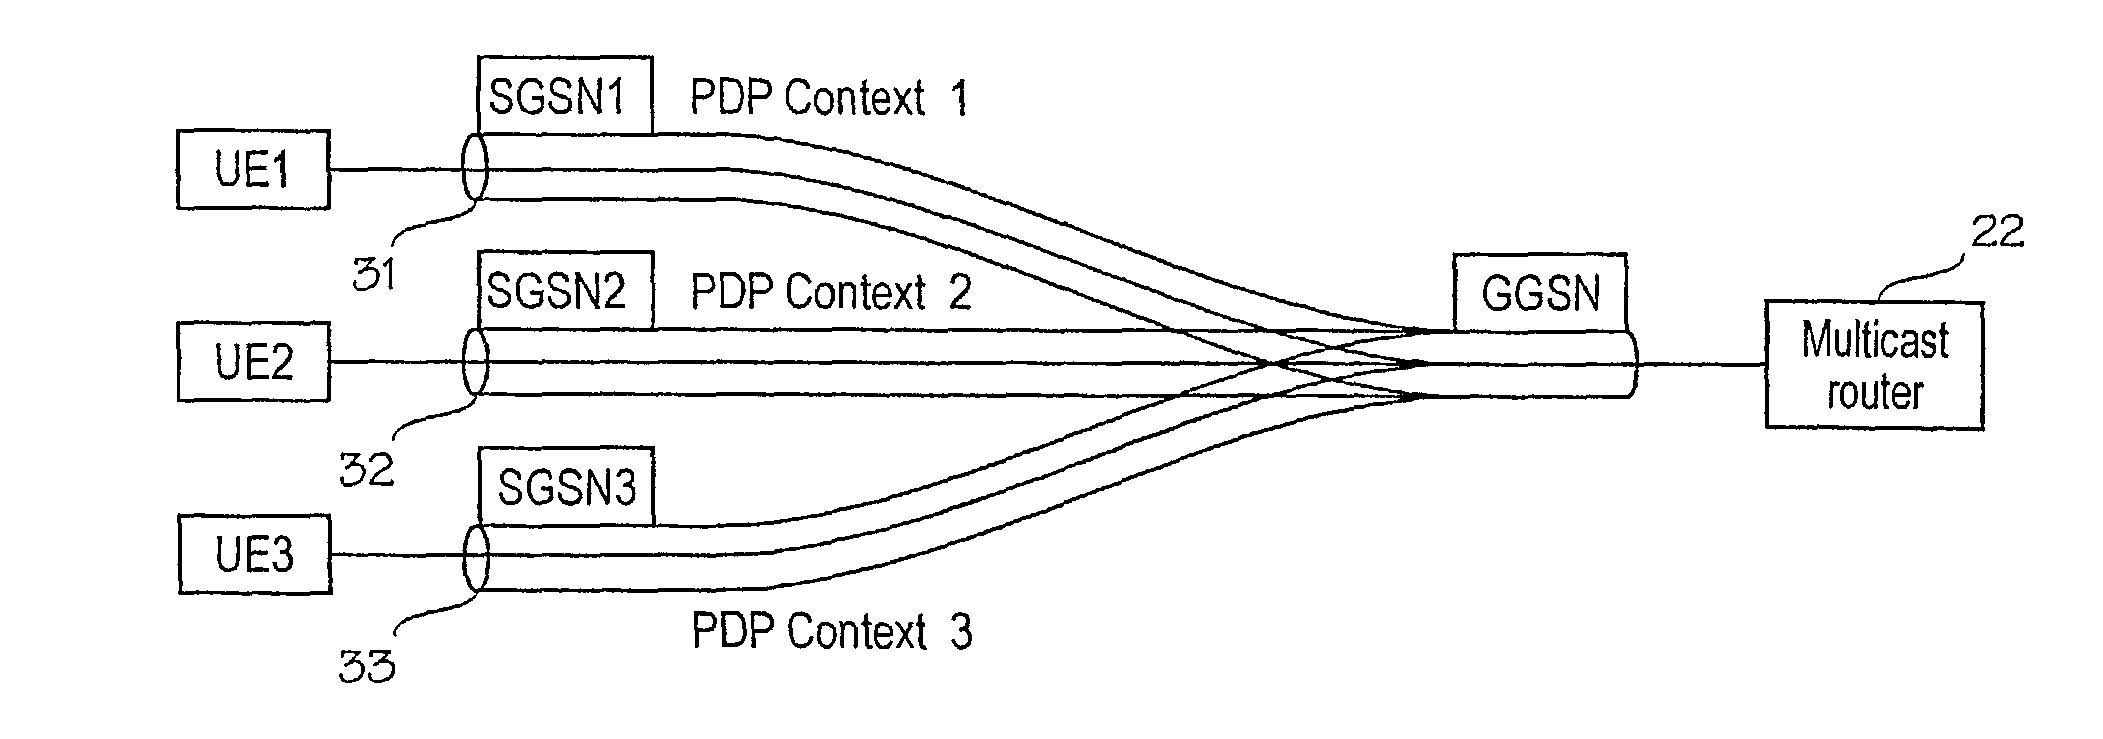 IP based voice communication in a mobile communications system